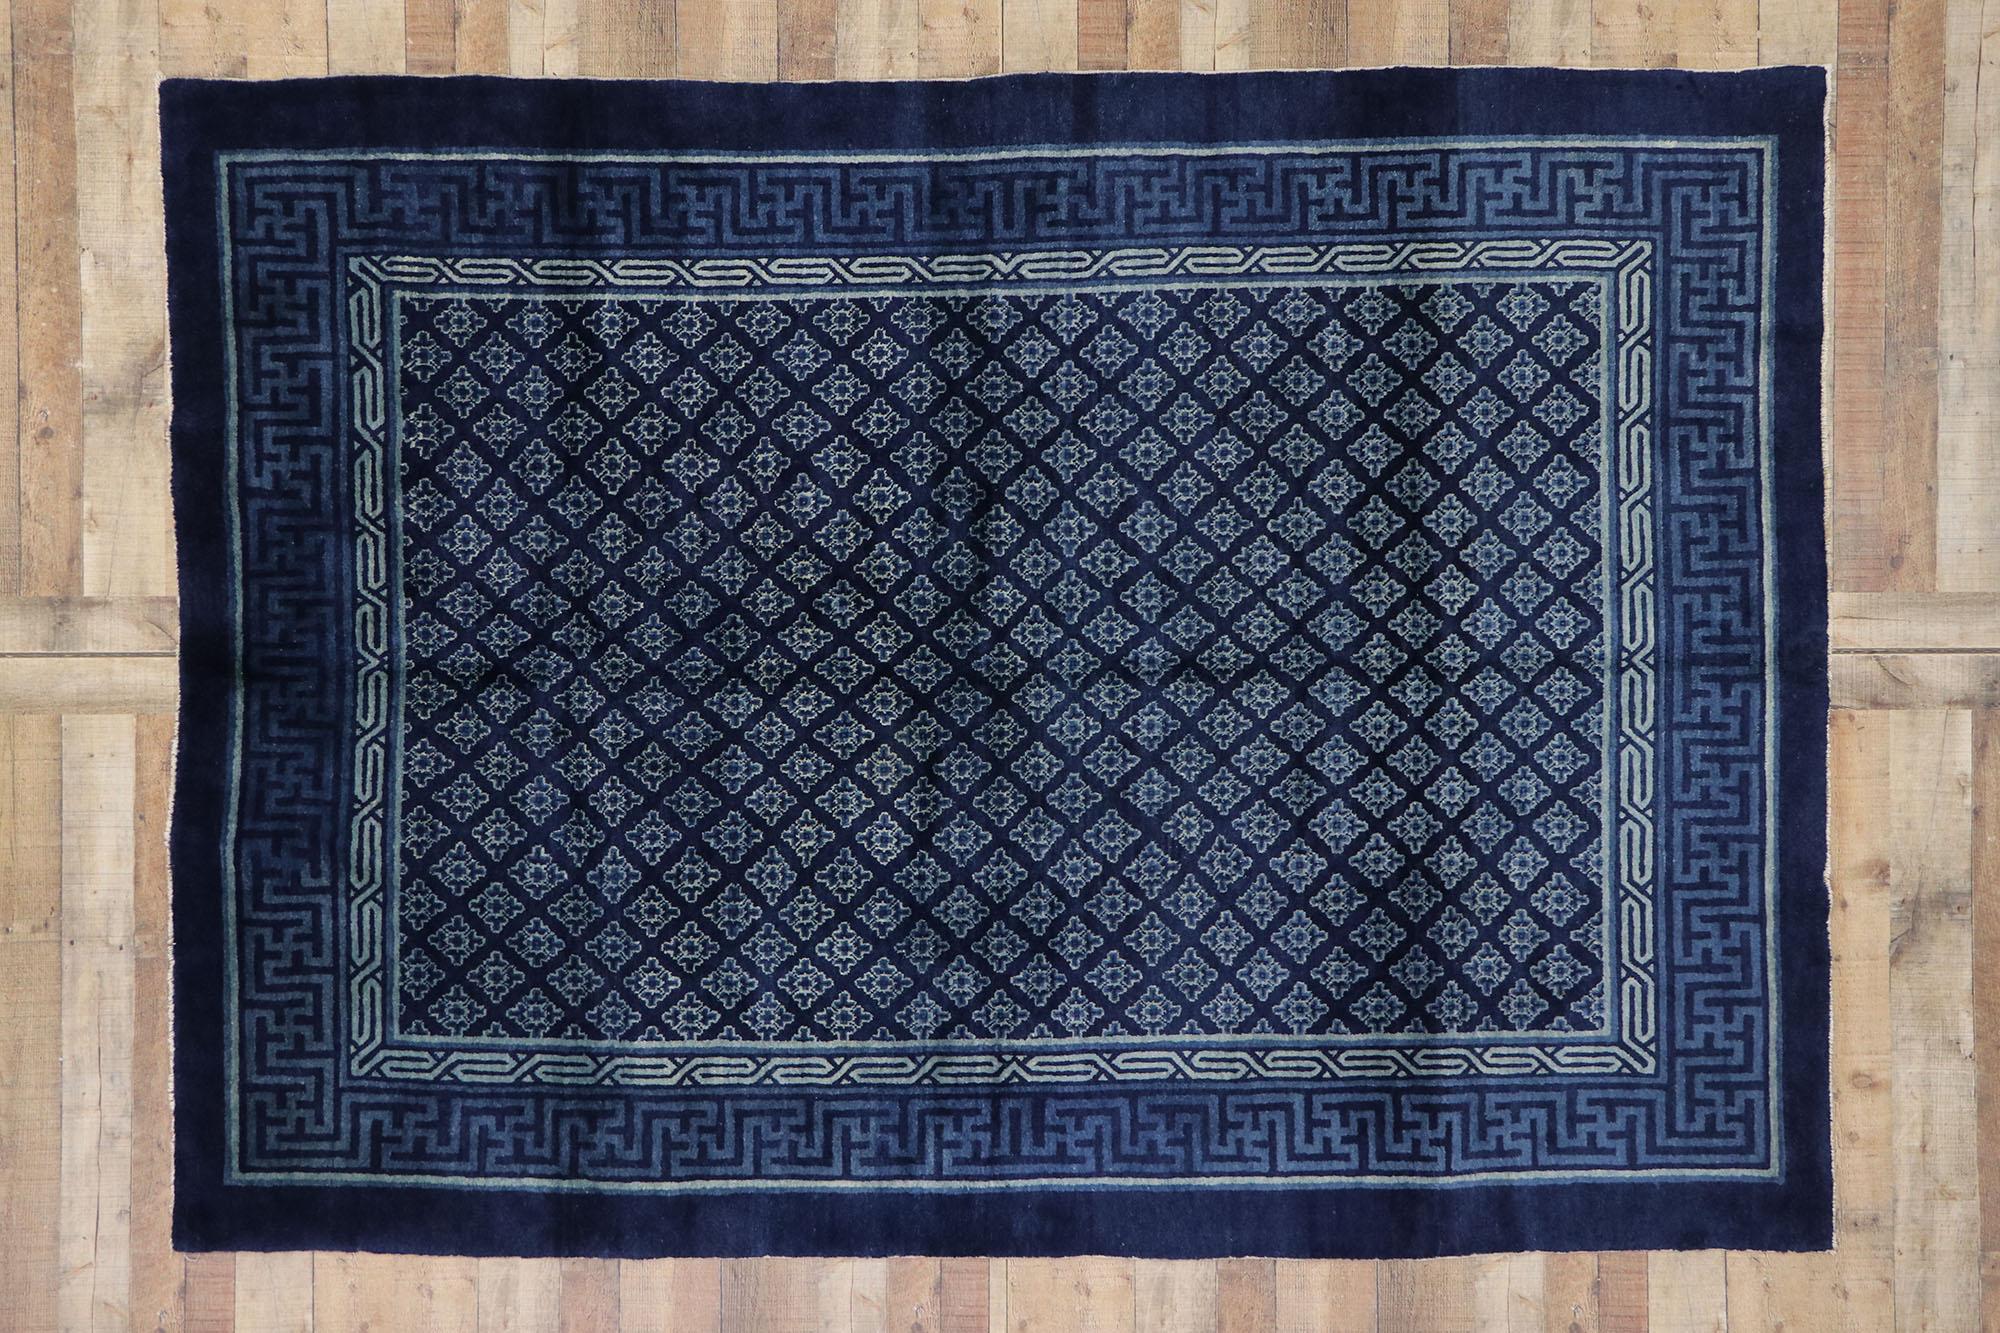 Antique Chinese Baotou Rug with Qing Dynasty Style 2